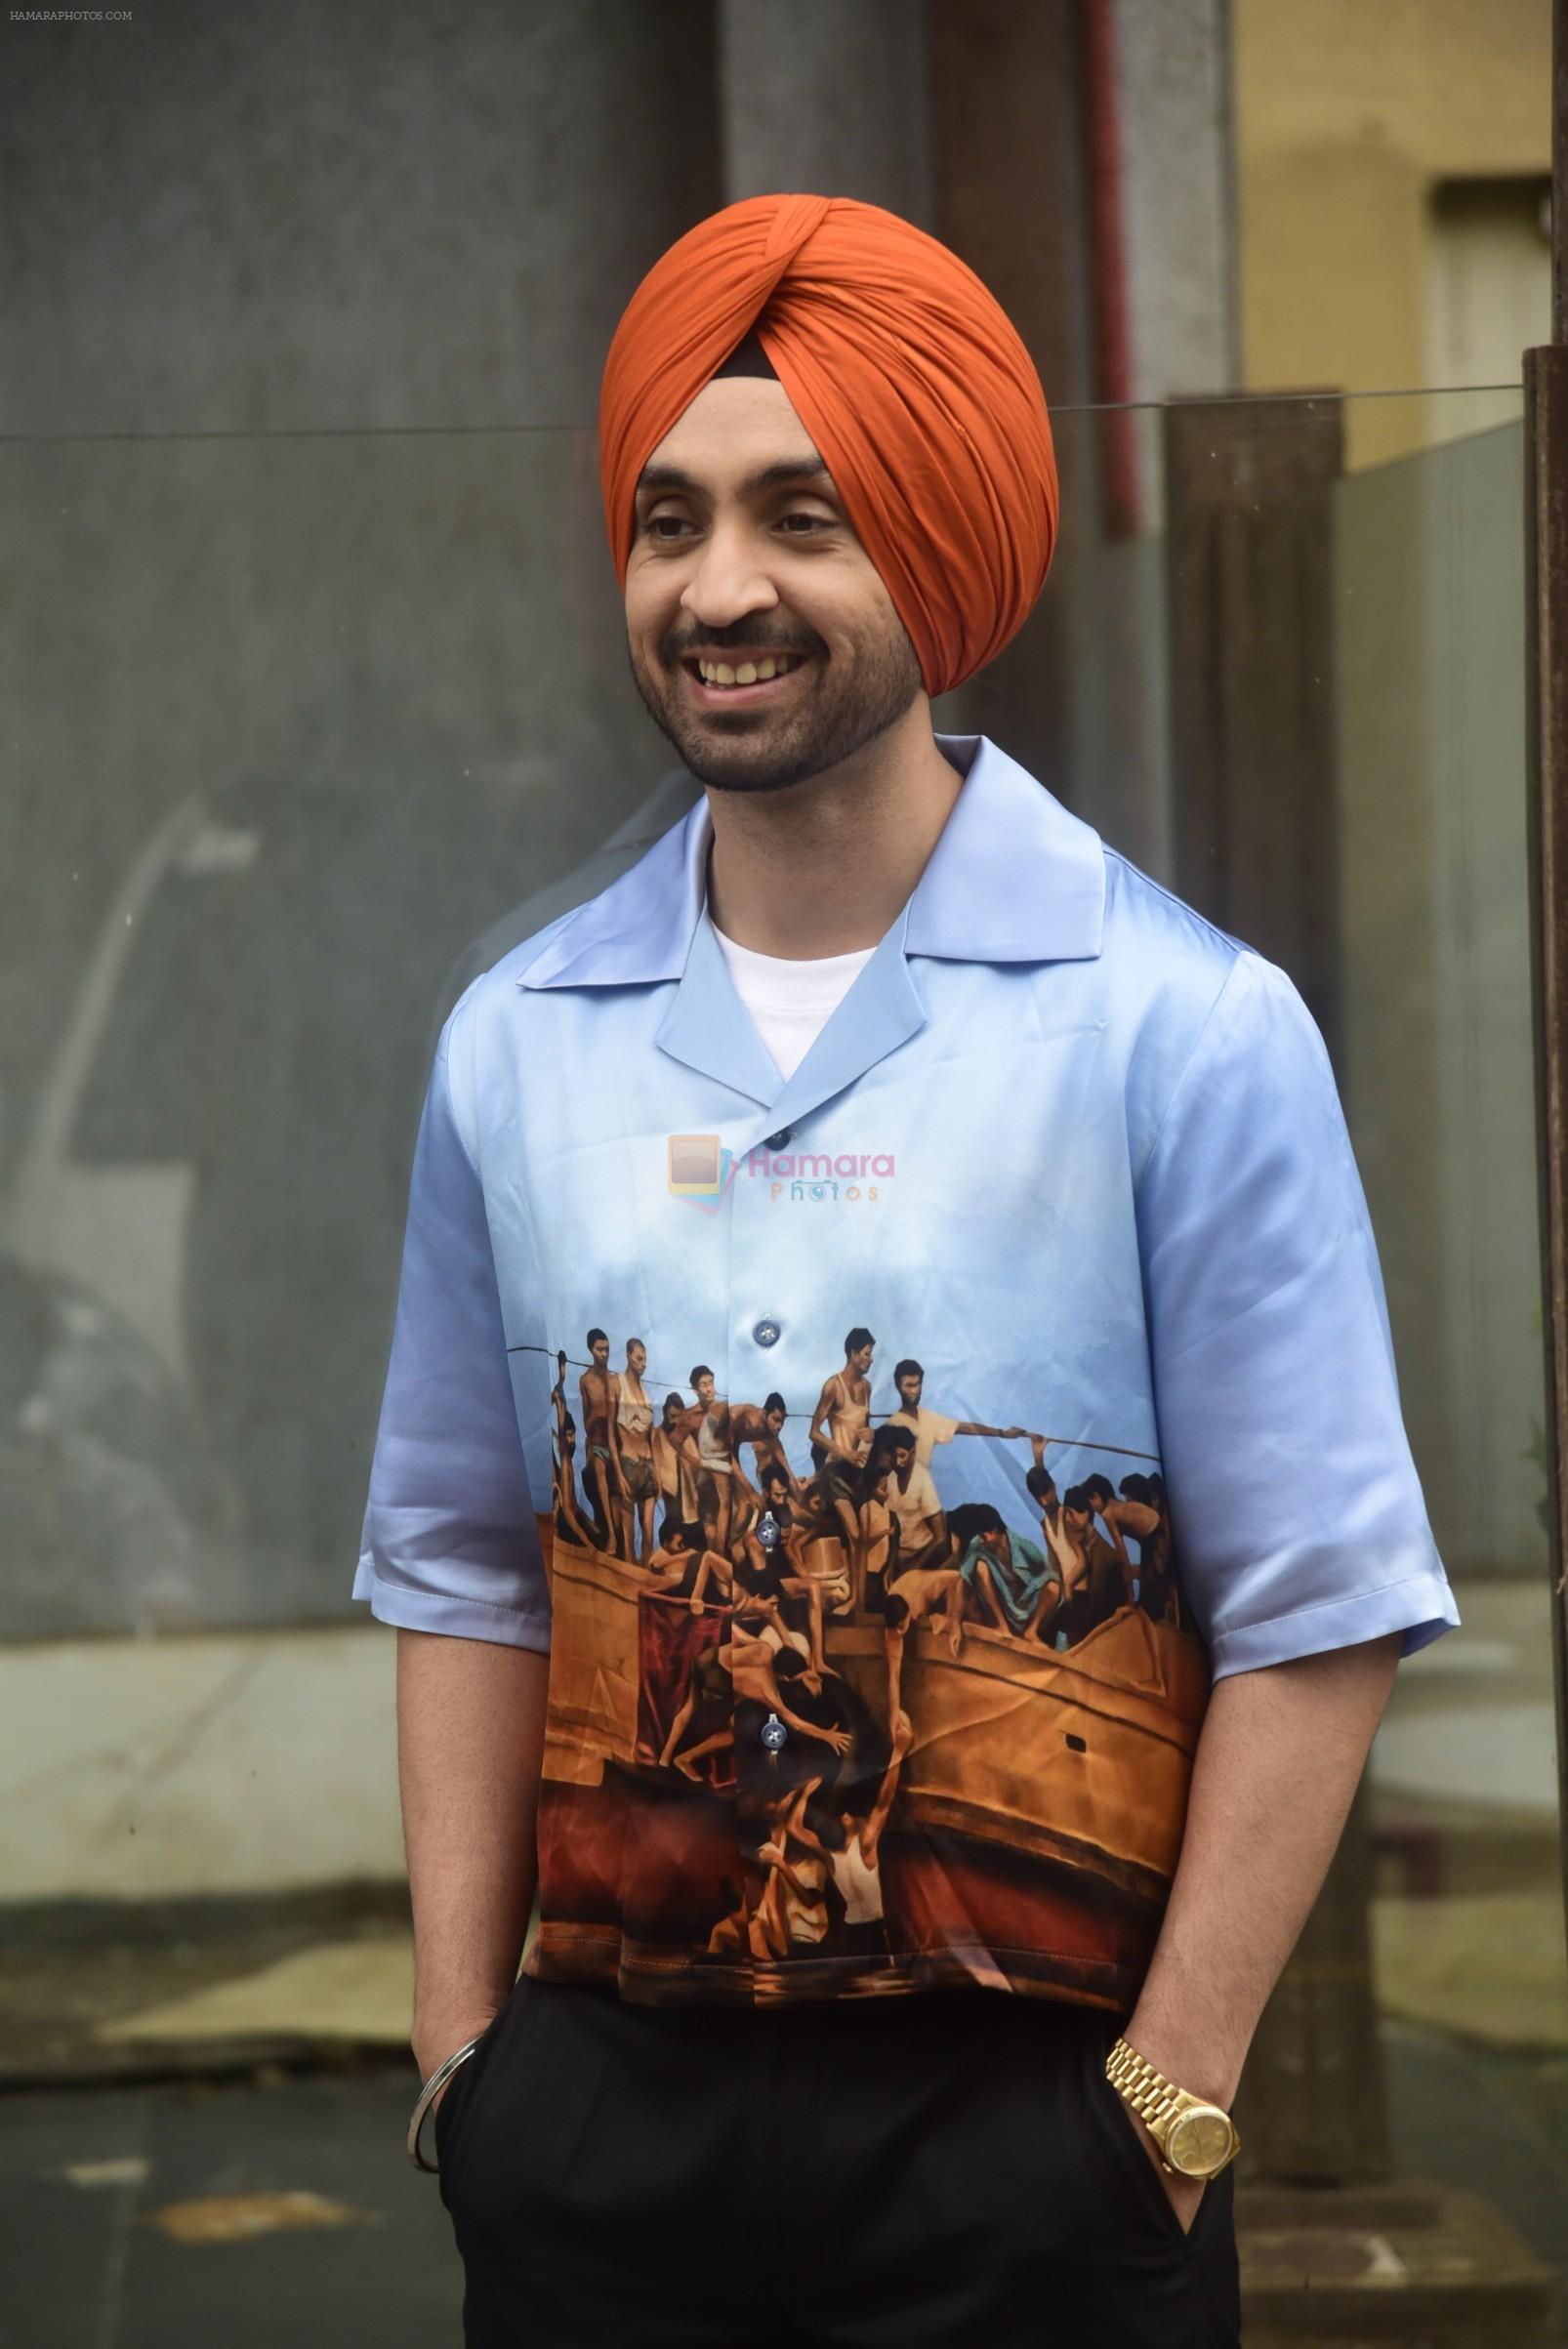 Diljit Dosanjh promotes his film Soorma at jw marriott in juhu on 22nd June 2018